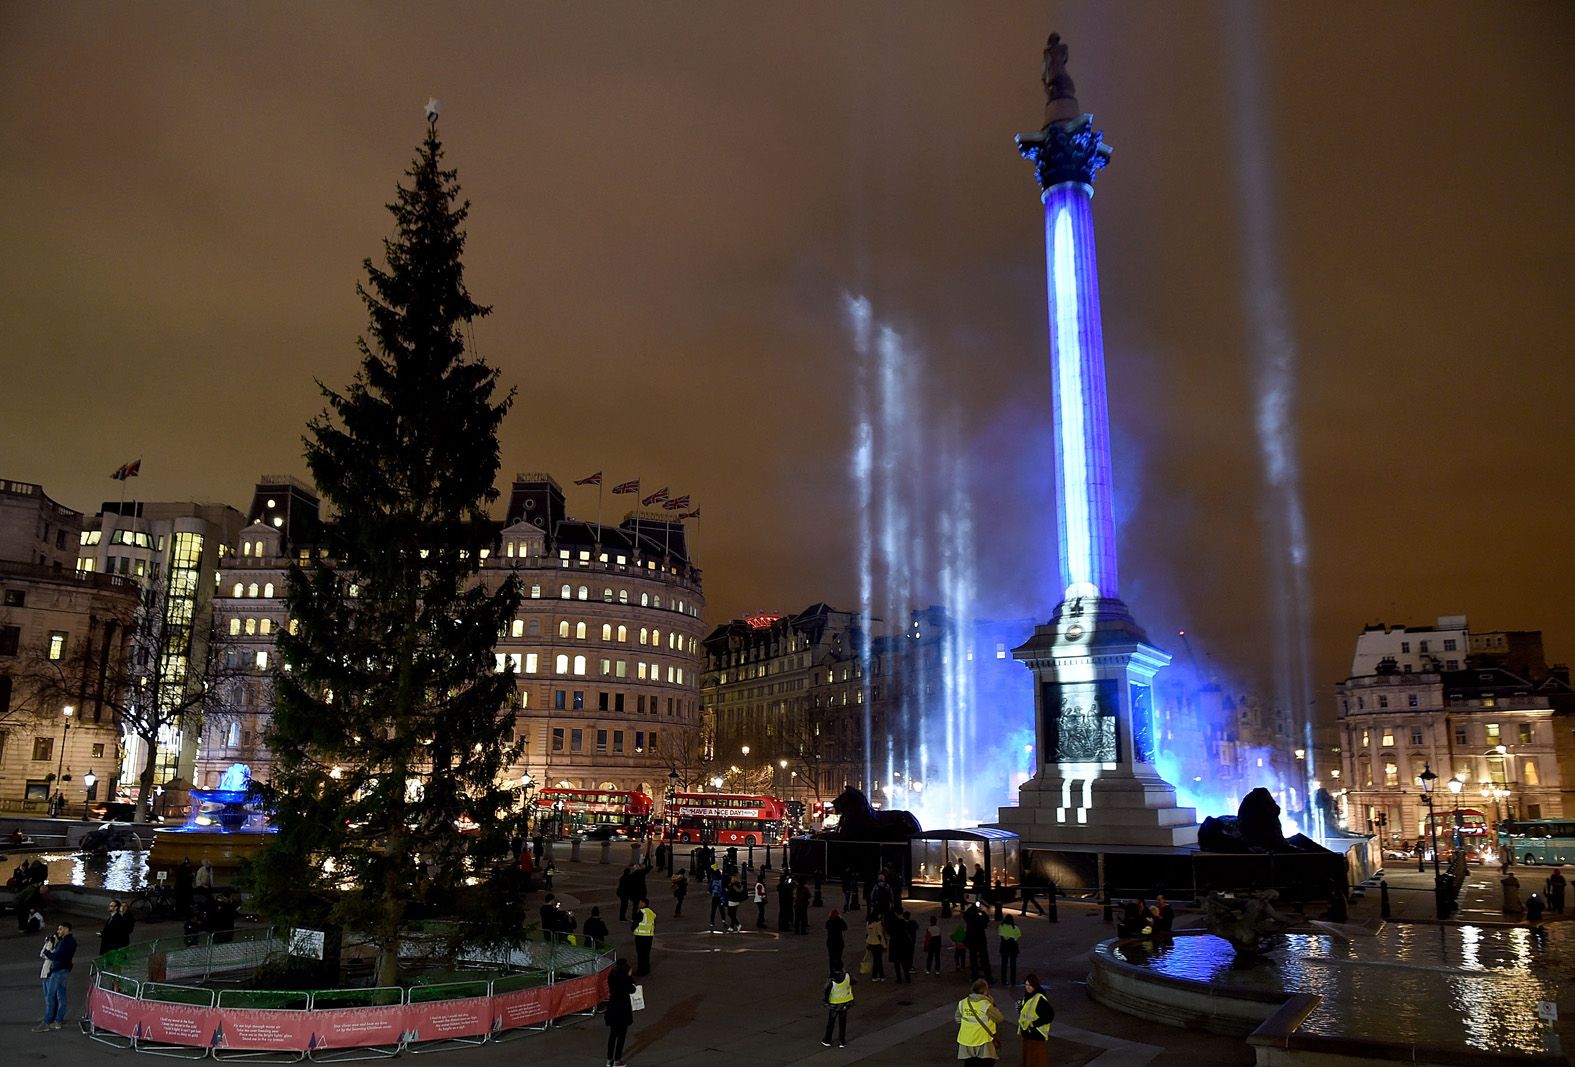 nelson’s column turns into a giant lightsaber and other crazy pictures from the star wars the force awakens london premiere image 1